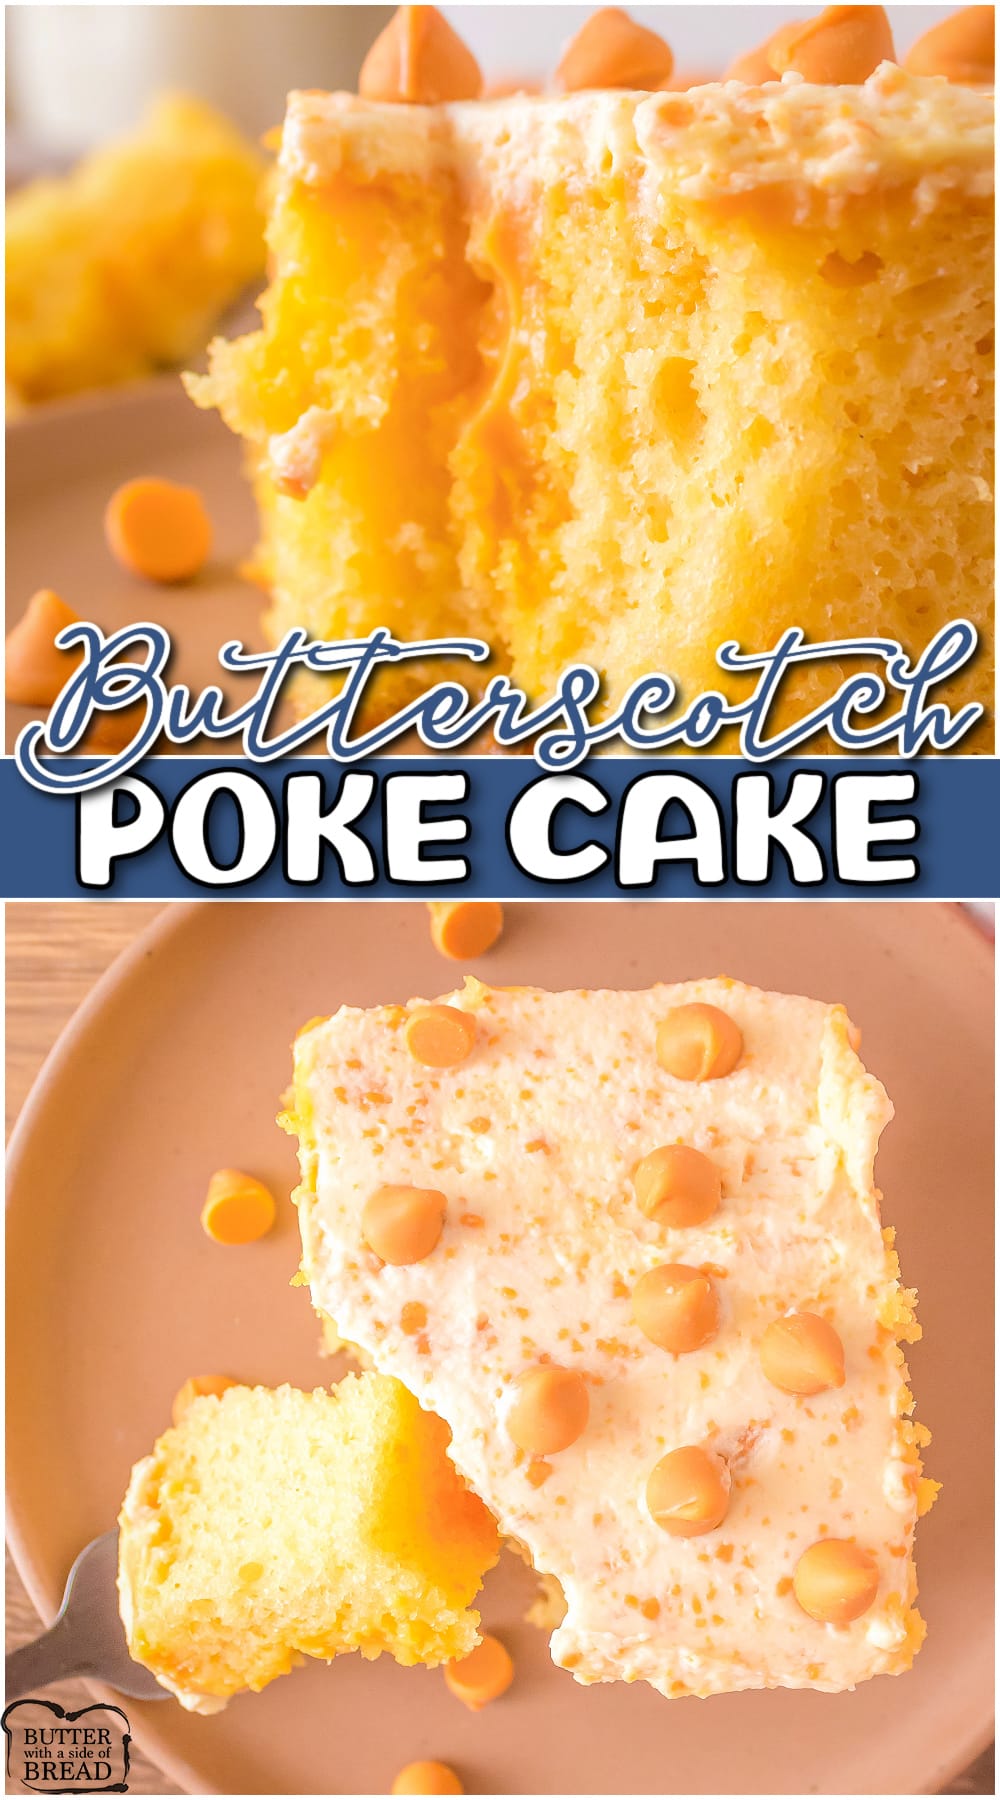 Butterscotch poke cake is an incredible cake perfect for butterscotch lovers! Starts with a cake mix & has butterscotch chips & pudding mix included!